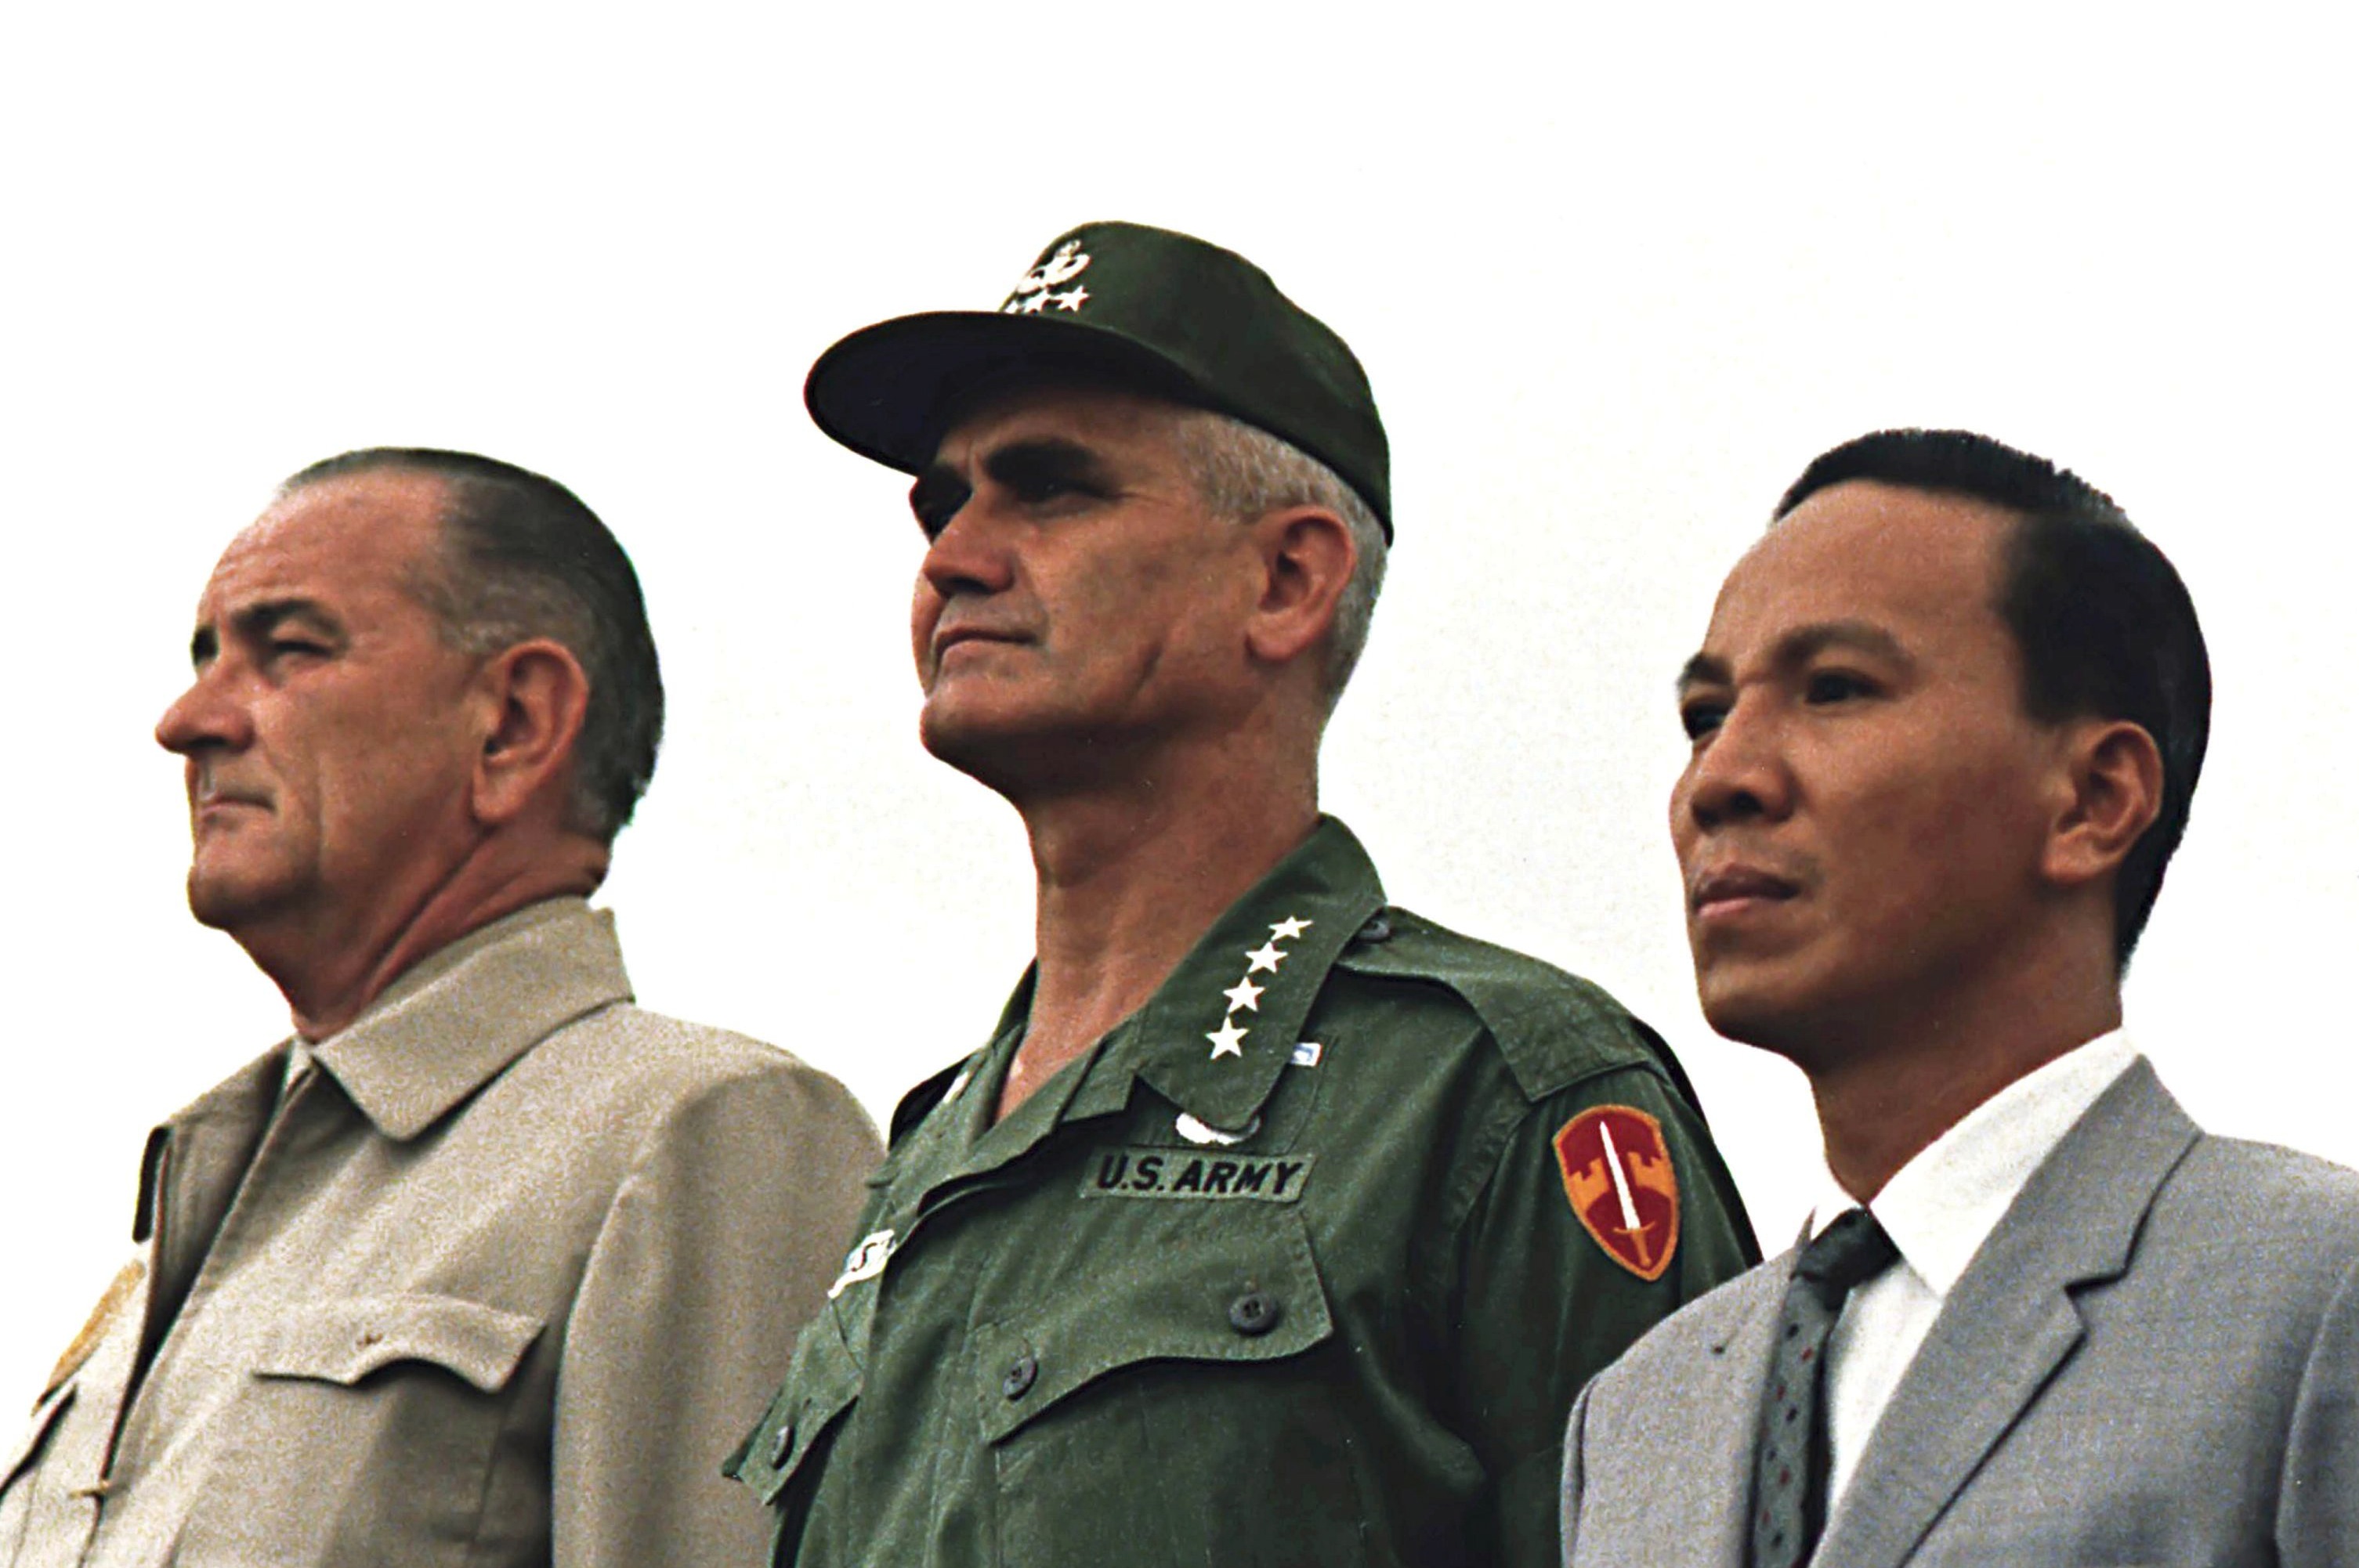 President Johnson, U.S. Army General William Westmoreland, and Vietnamese General Nguyen Van Thieu in 1967. (Universal History Archive / Getty Images)